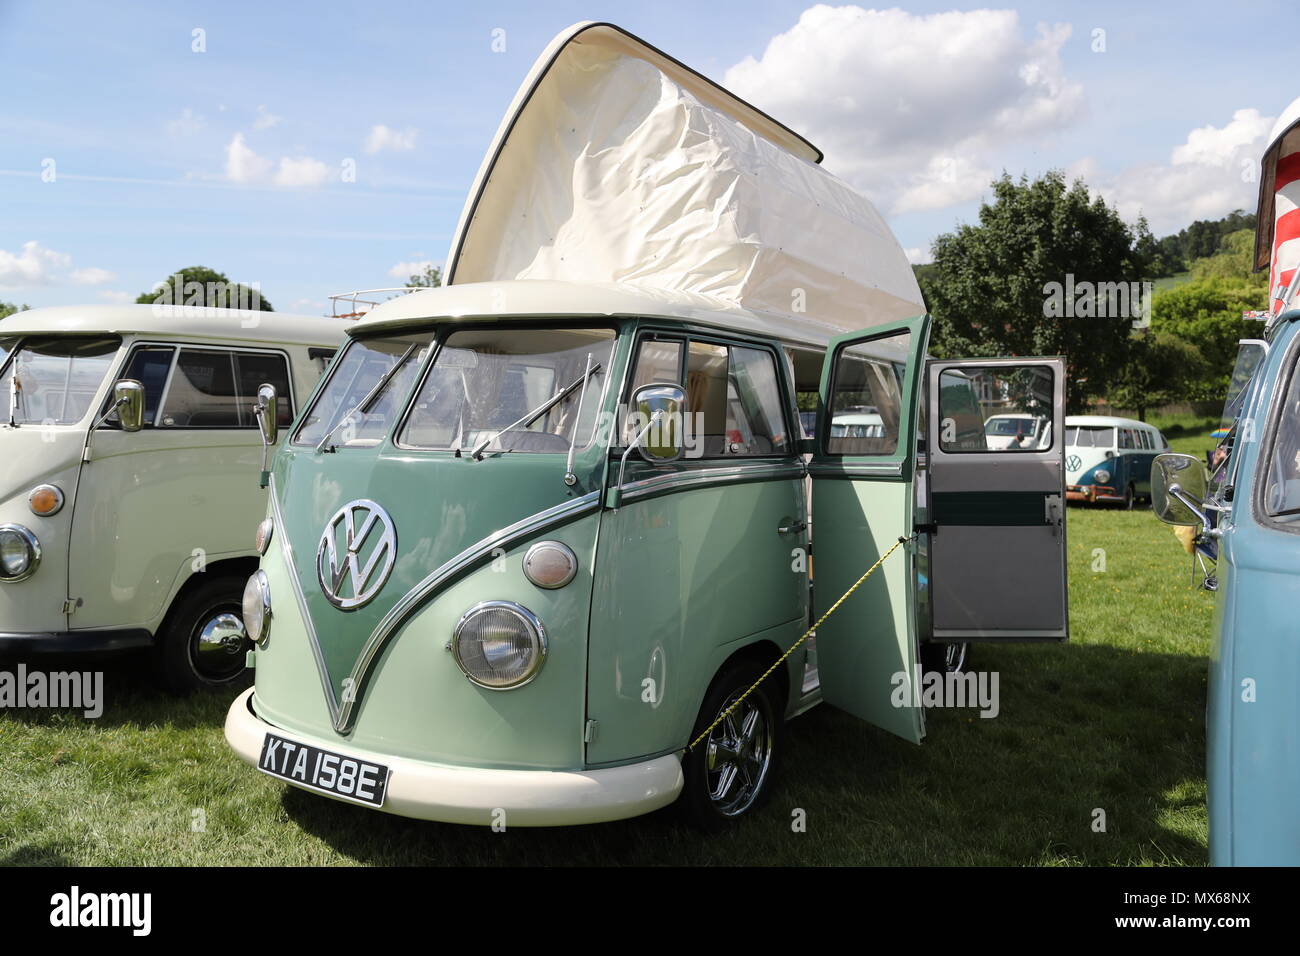 Stonor, Oxfordshire, UK. 3rd Jun, 2018. All types of historic Volkswagen cars and vans were displayed at this years's gathering of their owners. Fans could get close to well-loved vehicles from the German car manufacturer, which created its reputation for durability  and Hippie appeal in the 60s. VW vans were used as a basis for cmper vans. Credit: Uwe Deffner/Alamy Live News Stock Photo